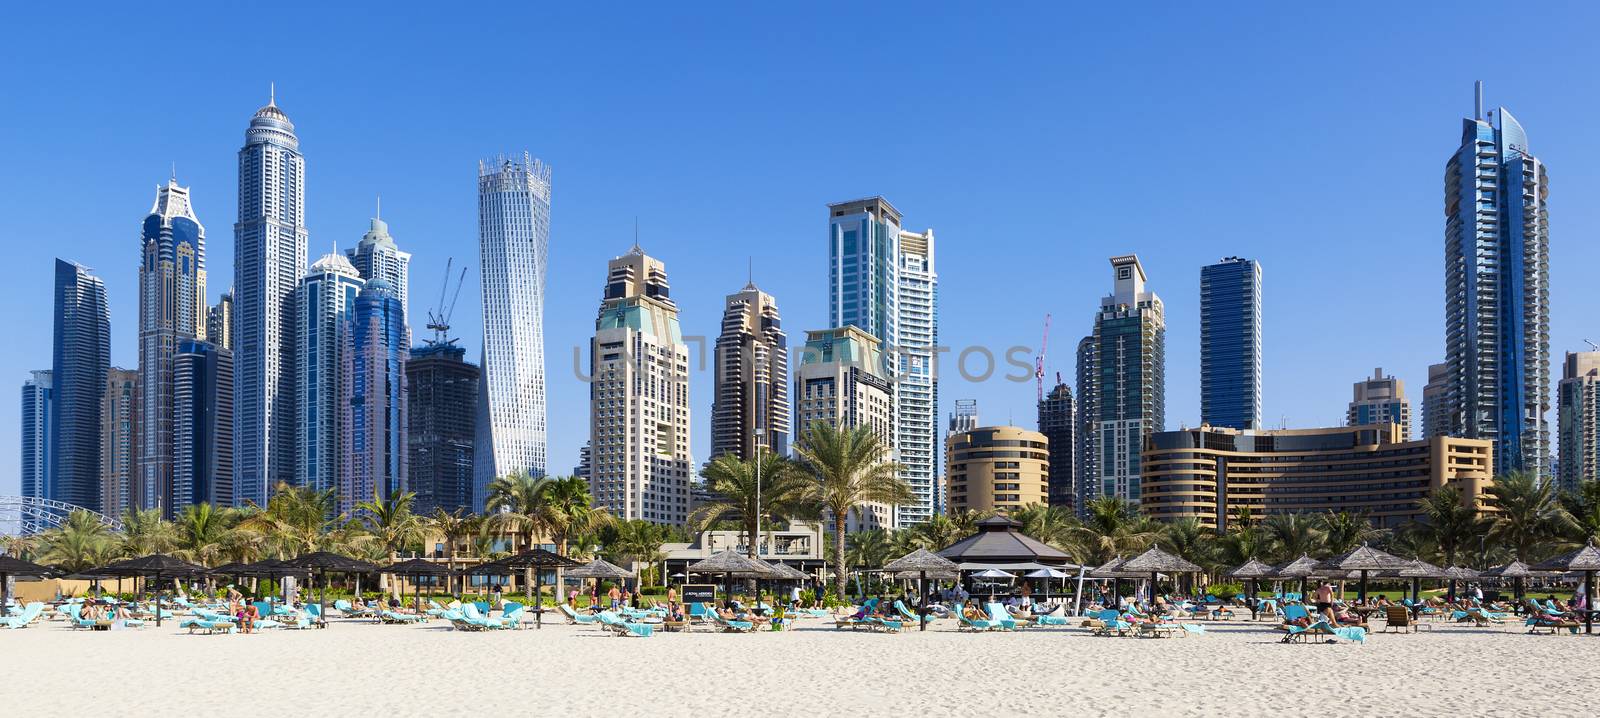 Panoramic view of famous skyscrapers and jumeirah beach by vwalakte